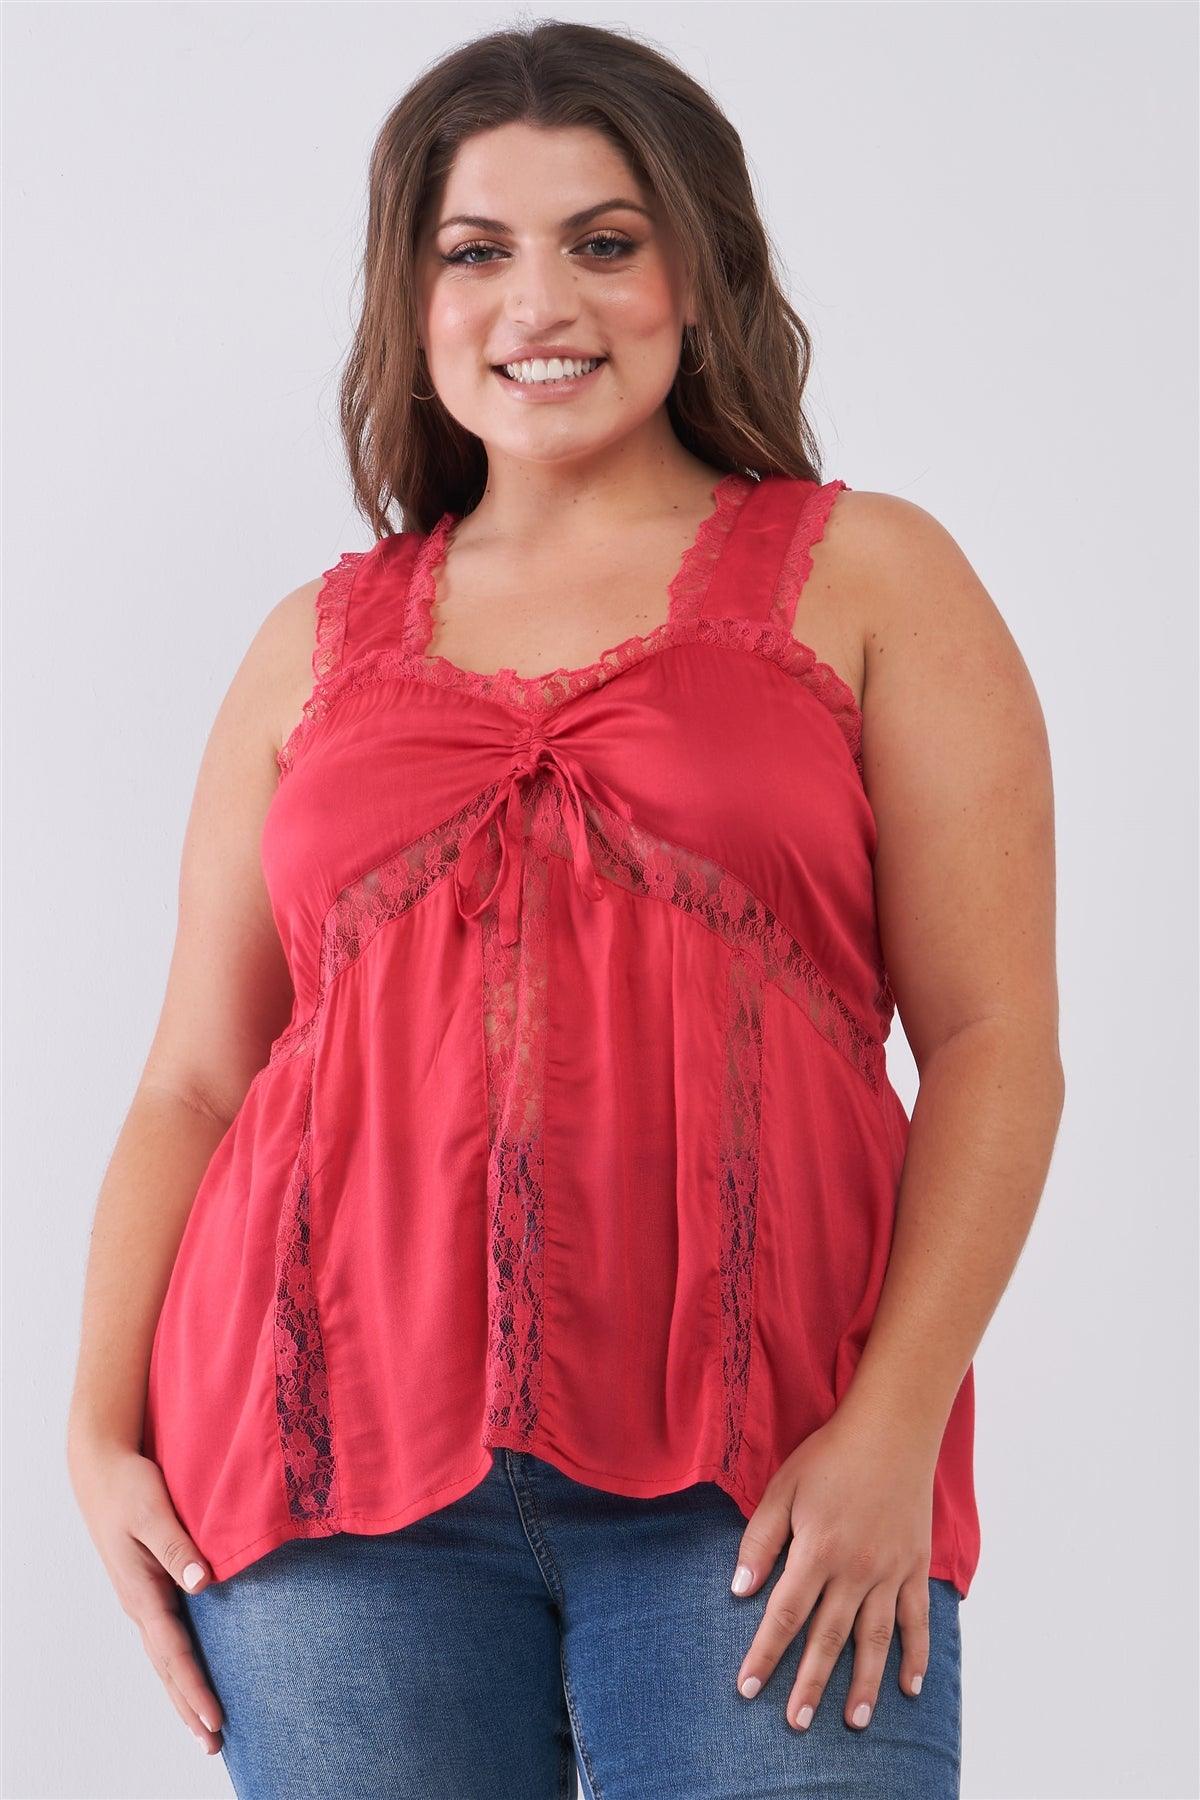 Junior Plus Fuchsia Lace Trim Sleeveless Gathered Front With Self-Tie Drawstring Top /2-2-2